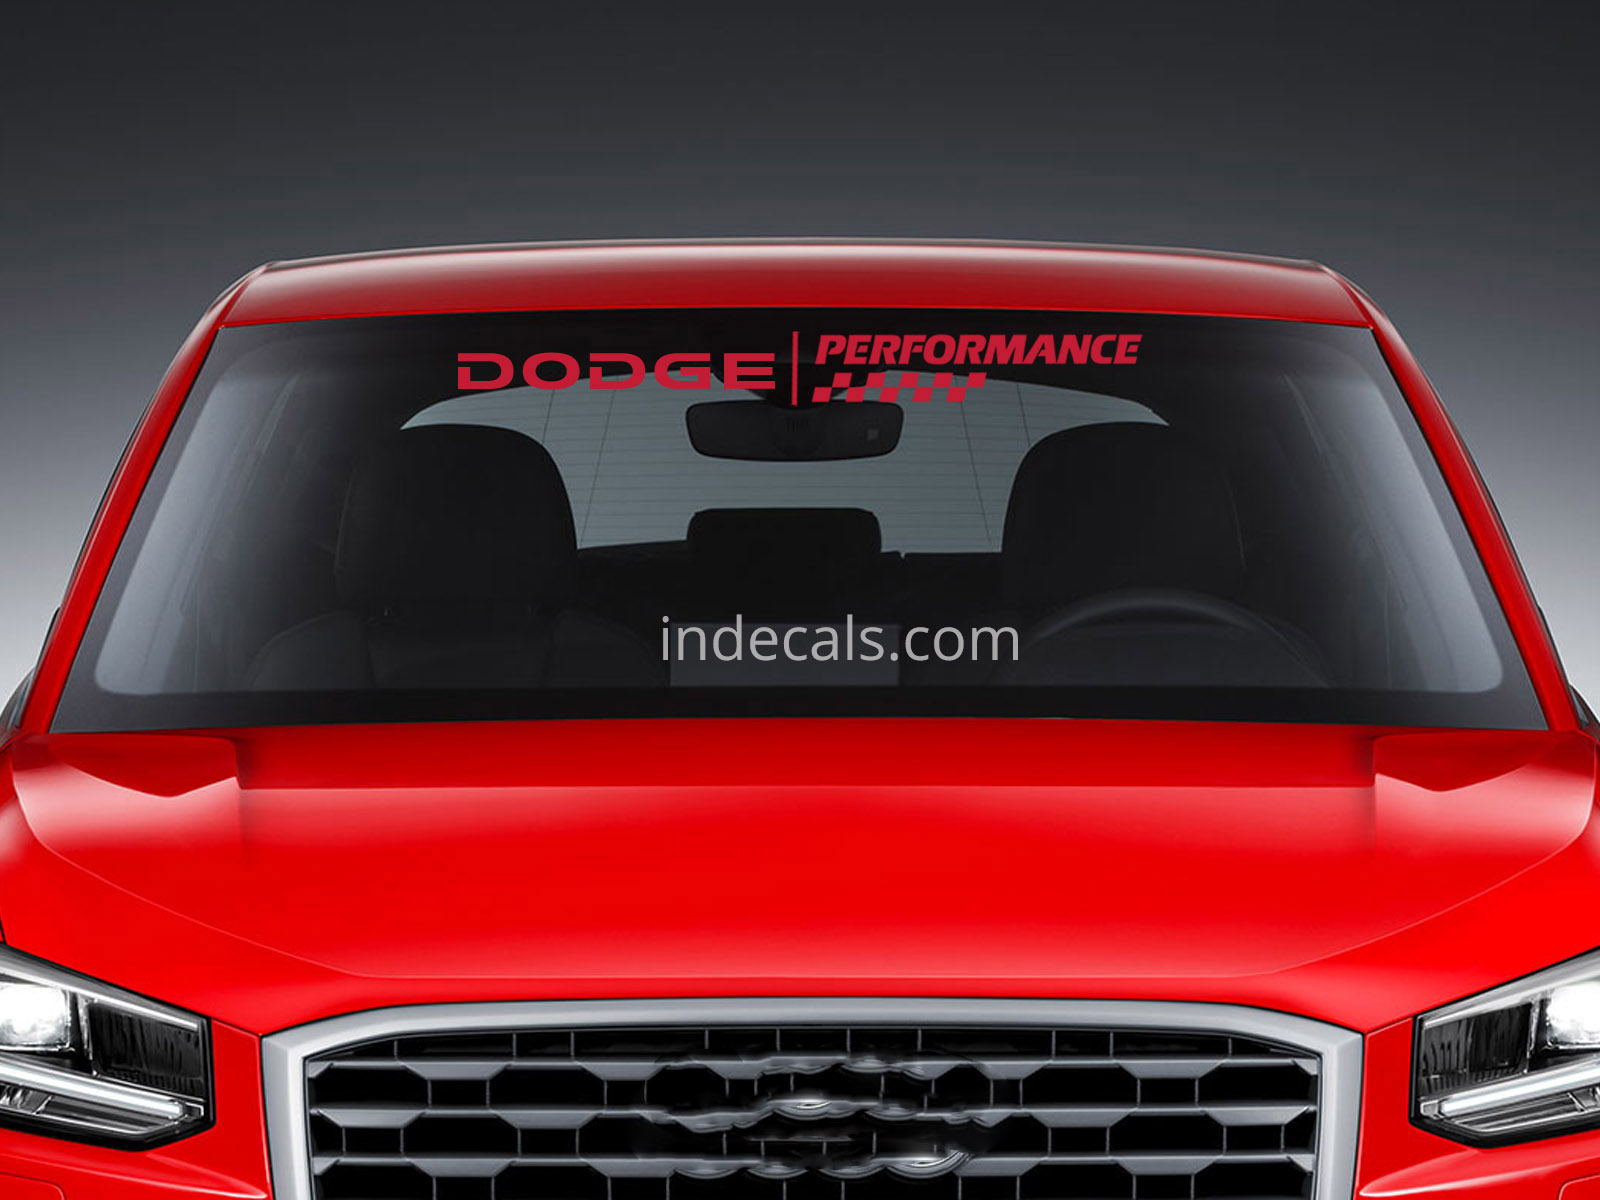 1 x Dodge Performance Sticker for Windshield or Back Window - Red